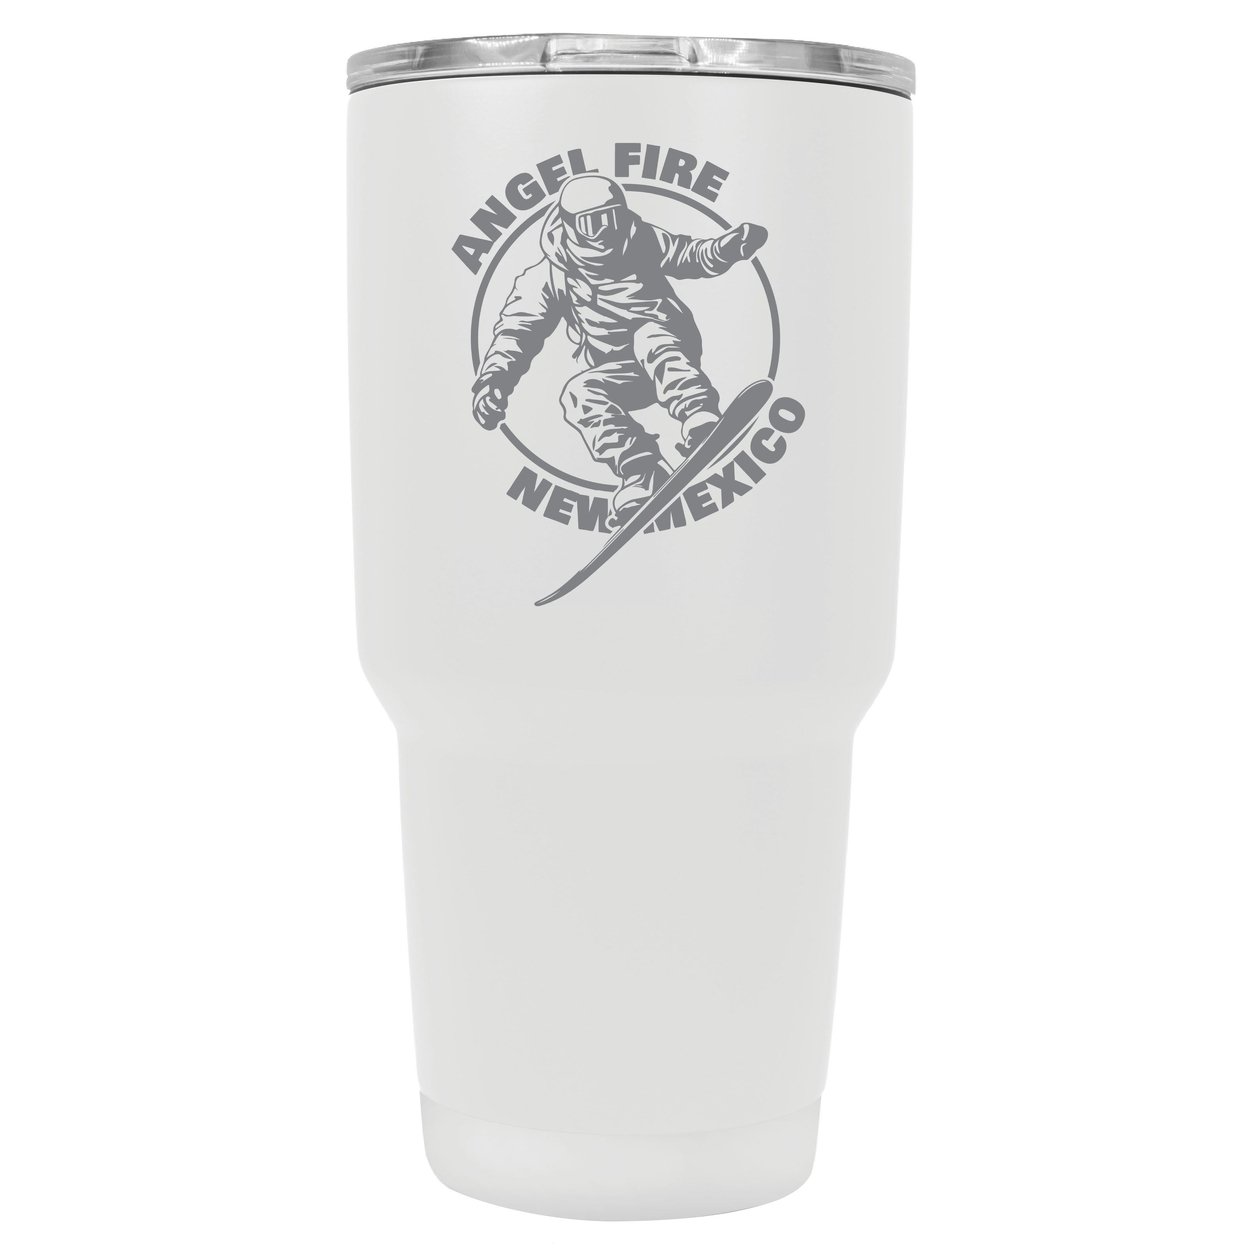 Angel Fire New Mexico Souvenir 24 Oz Engraved Insulated Stainless Steel Tumbler - White,,2-Pack